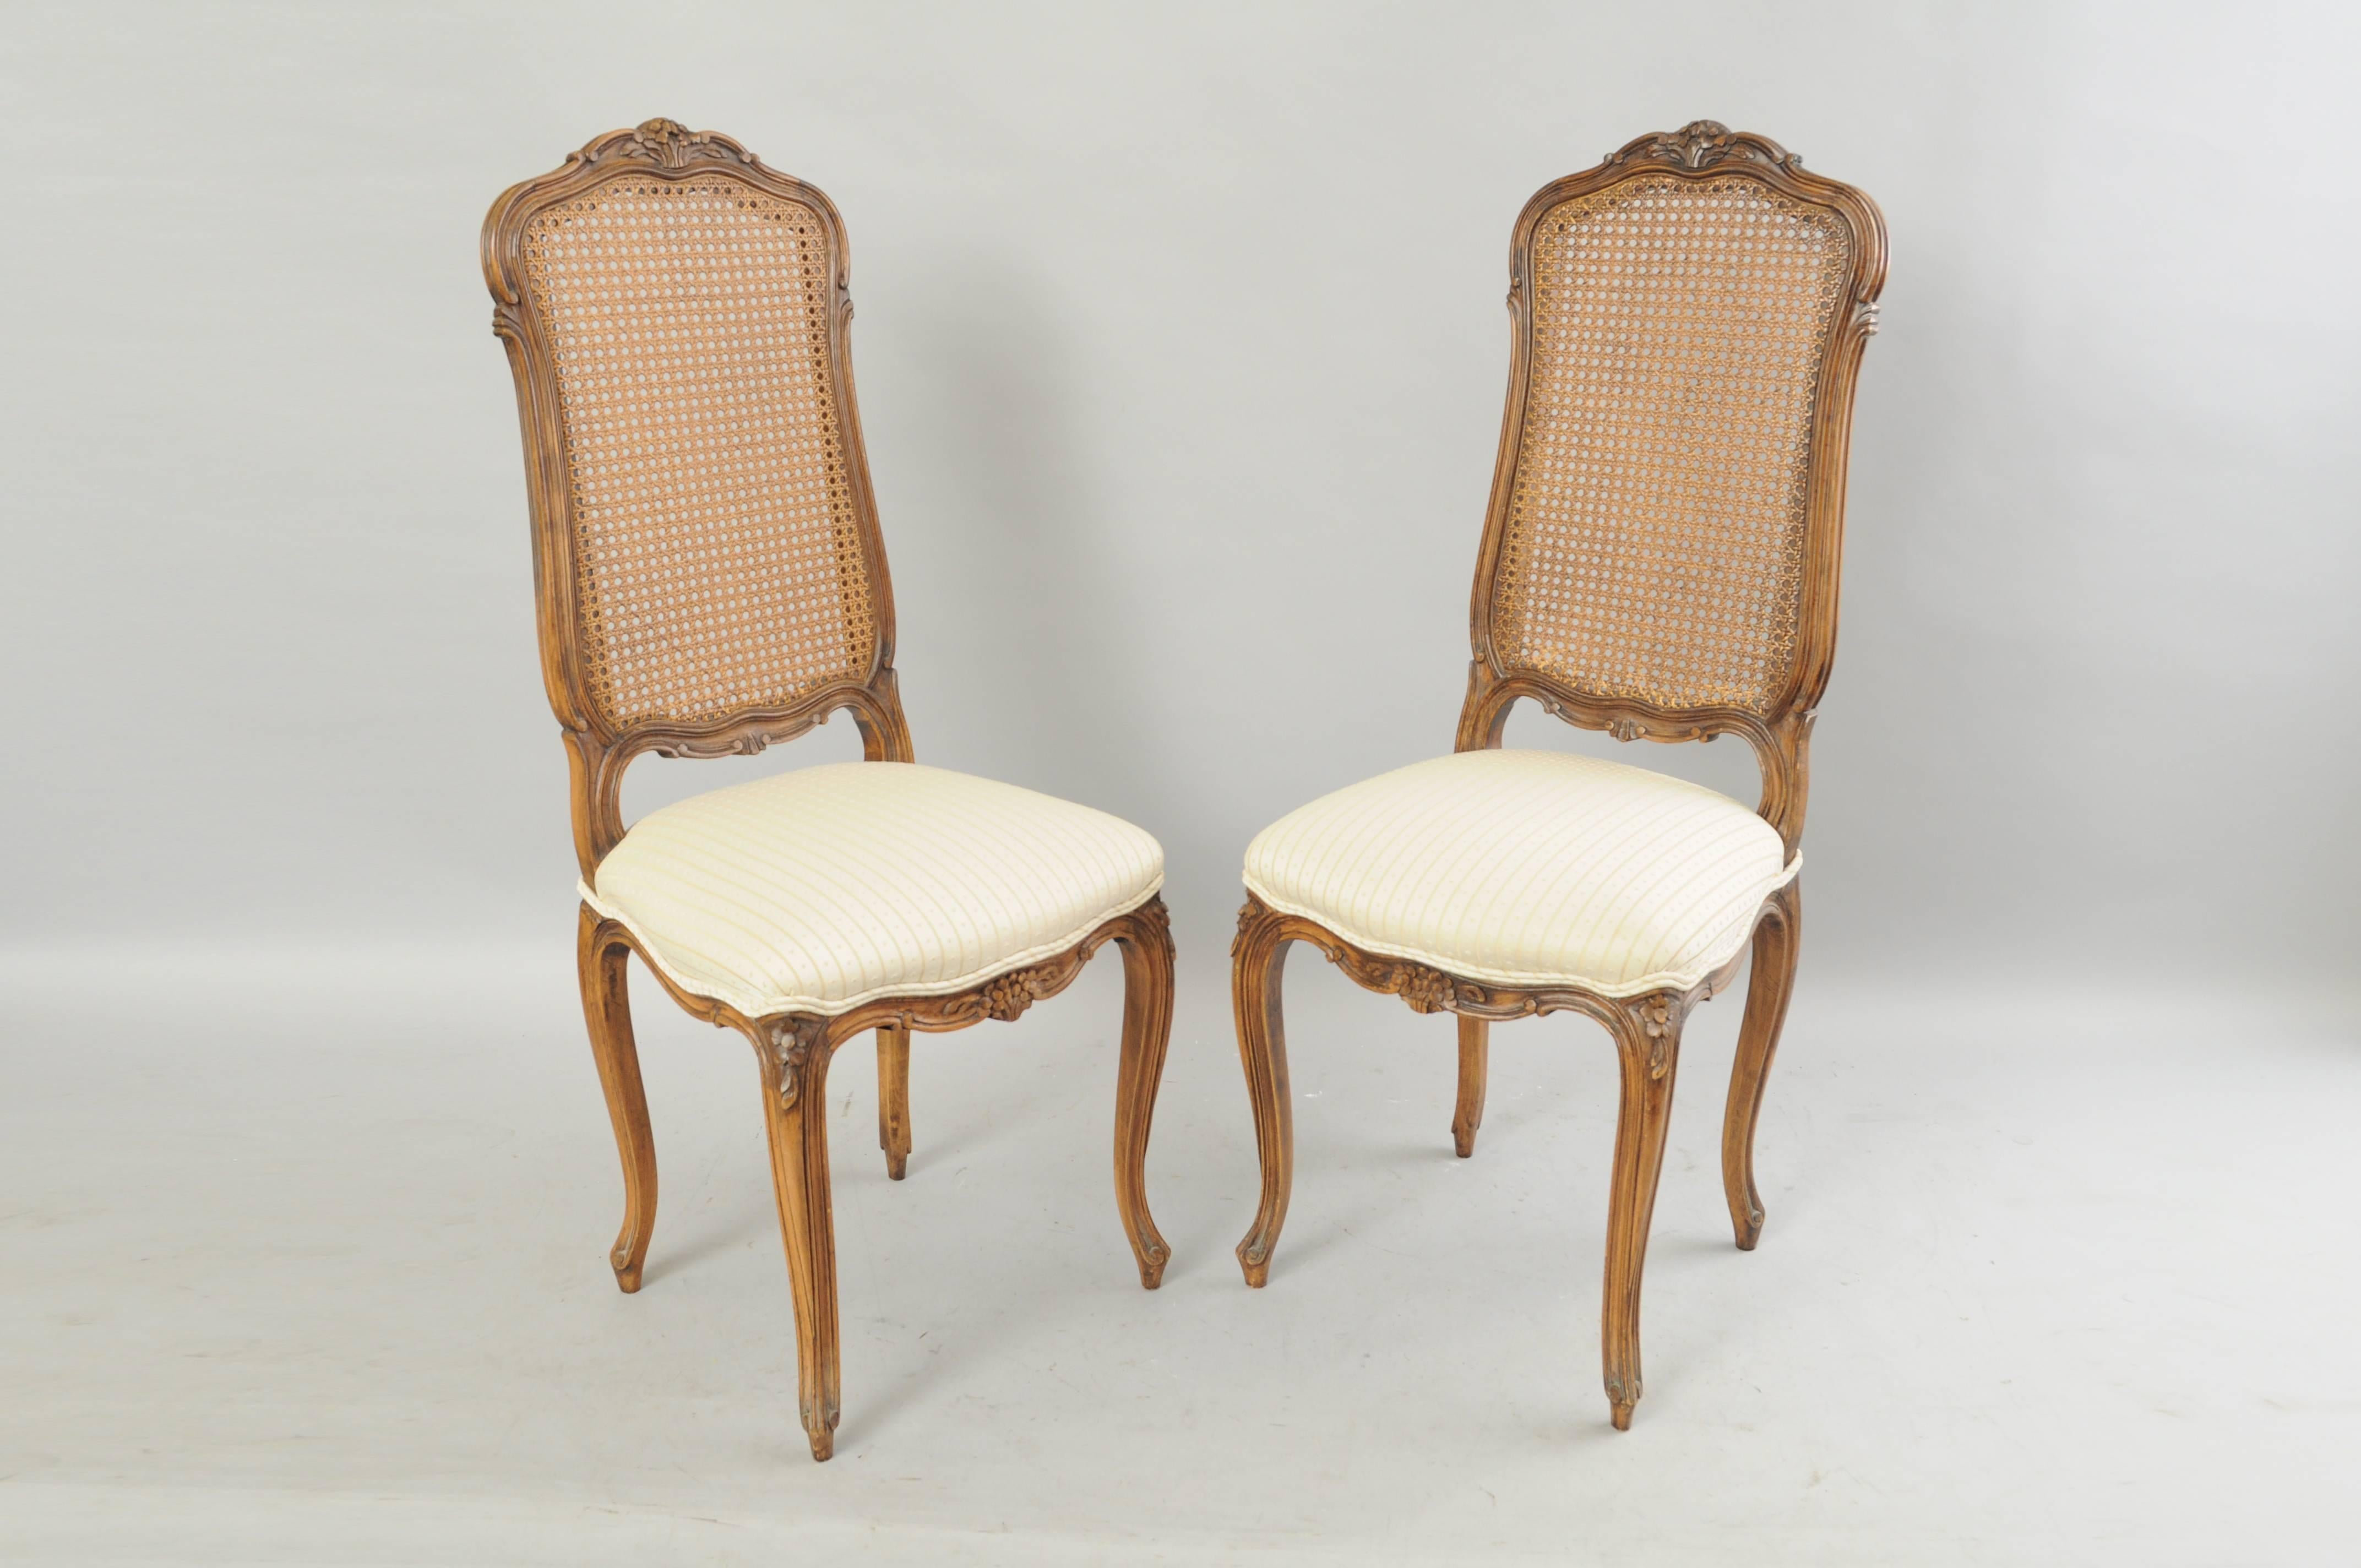 Quality set of six vintage French country / Louis XV style tall cane / rattan back solid walnut dining chairs. The set features elegant narrow frames, carved crests and rails, cabriole legs, cane backs, upholstered seats, and great quality and form.